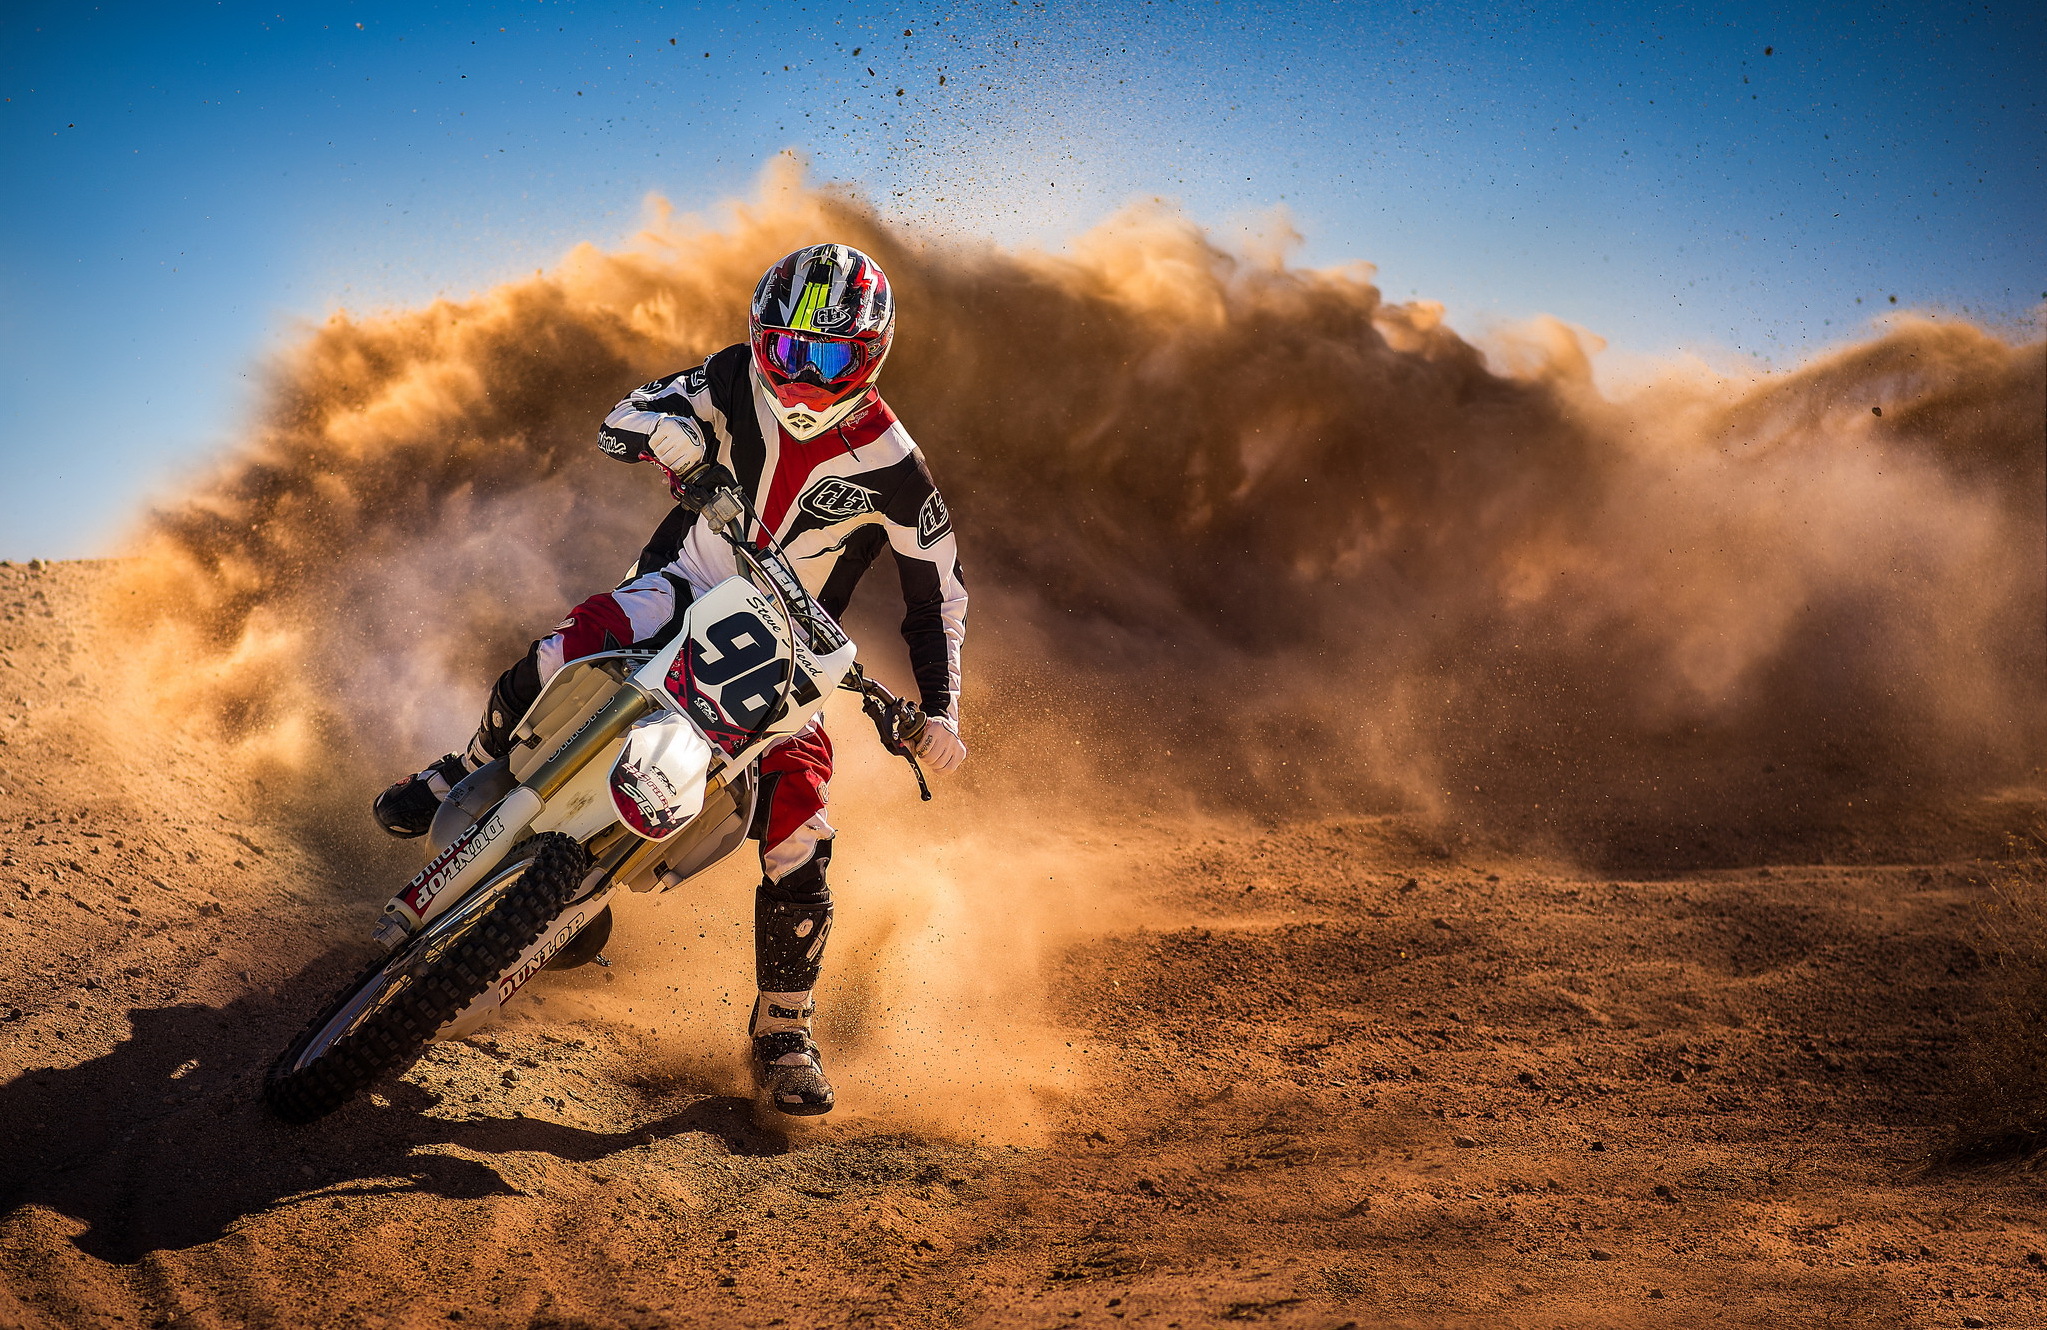 motorcycle, motorcycles, sports, motorcyclist, dust, race HD for desktop 1080p